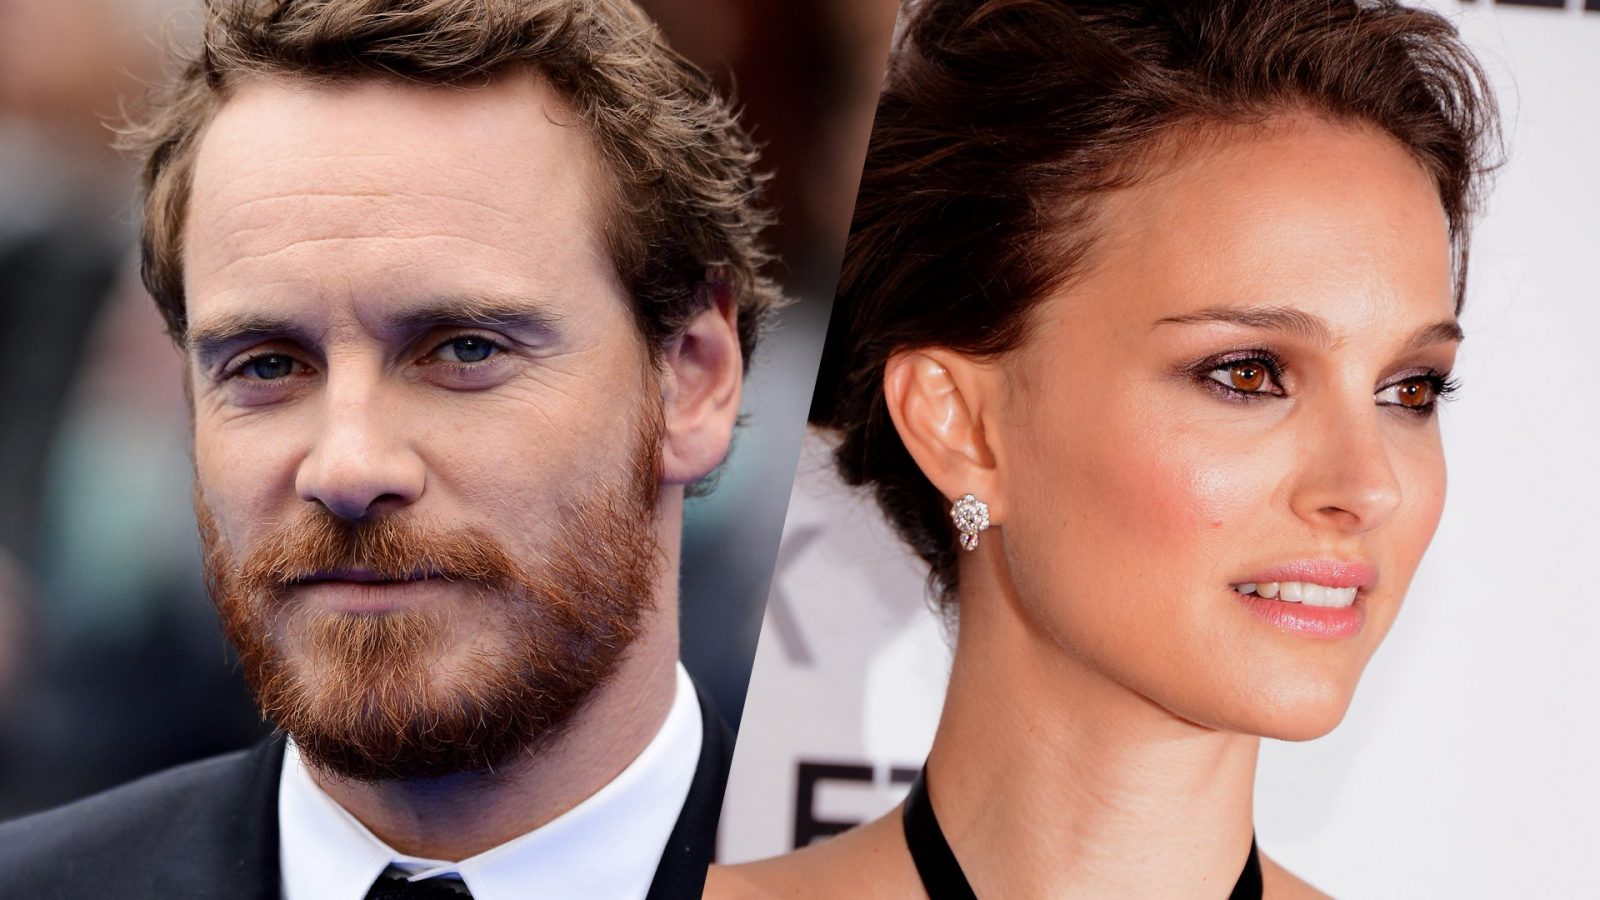 Are Natalie Portman And Michael Fassbender Dating?